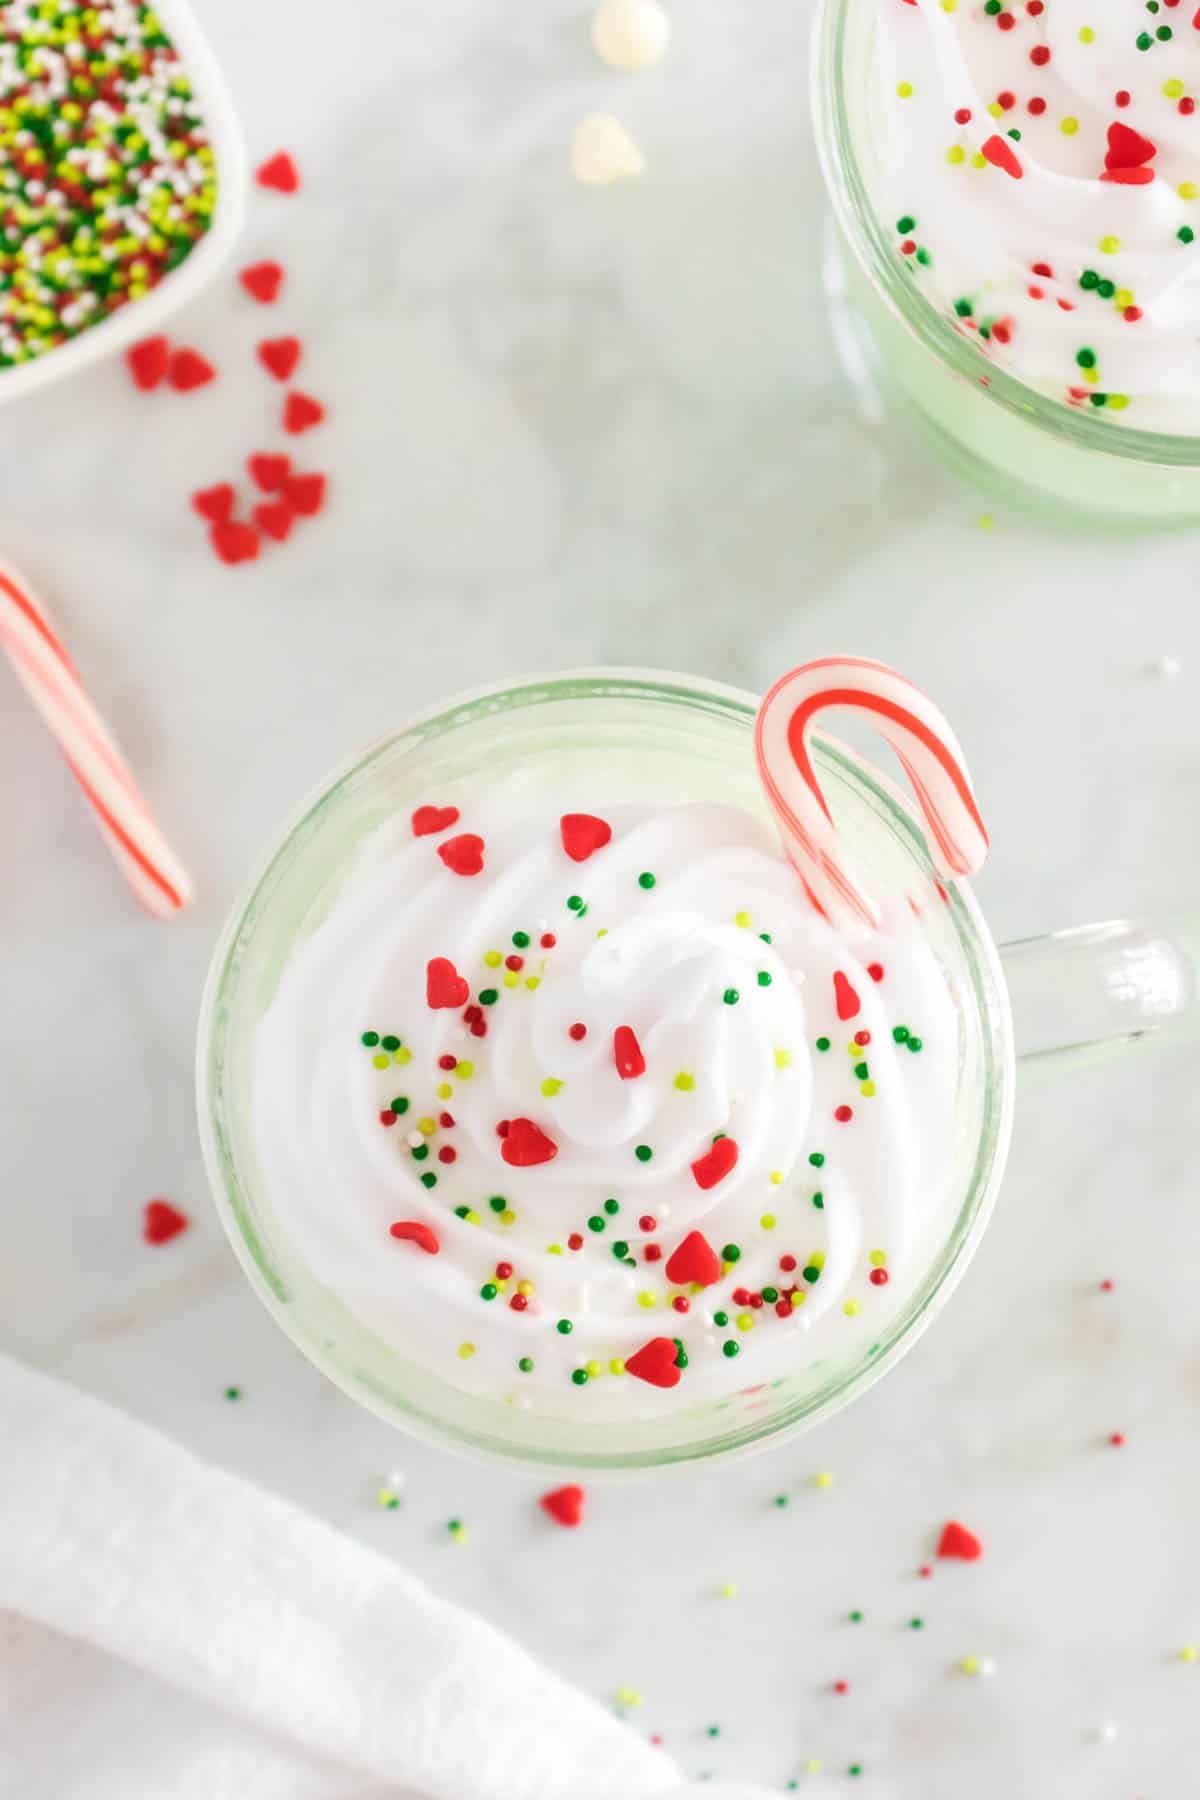 Looking down in a hot chocolate mug to see the whipped cream, sprinkles, and candy cane on top.